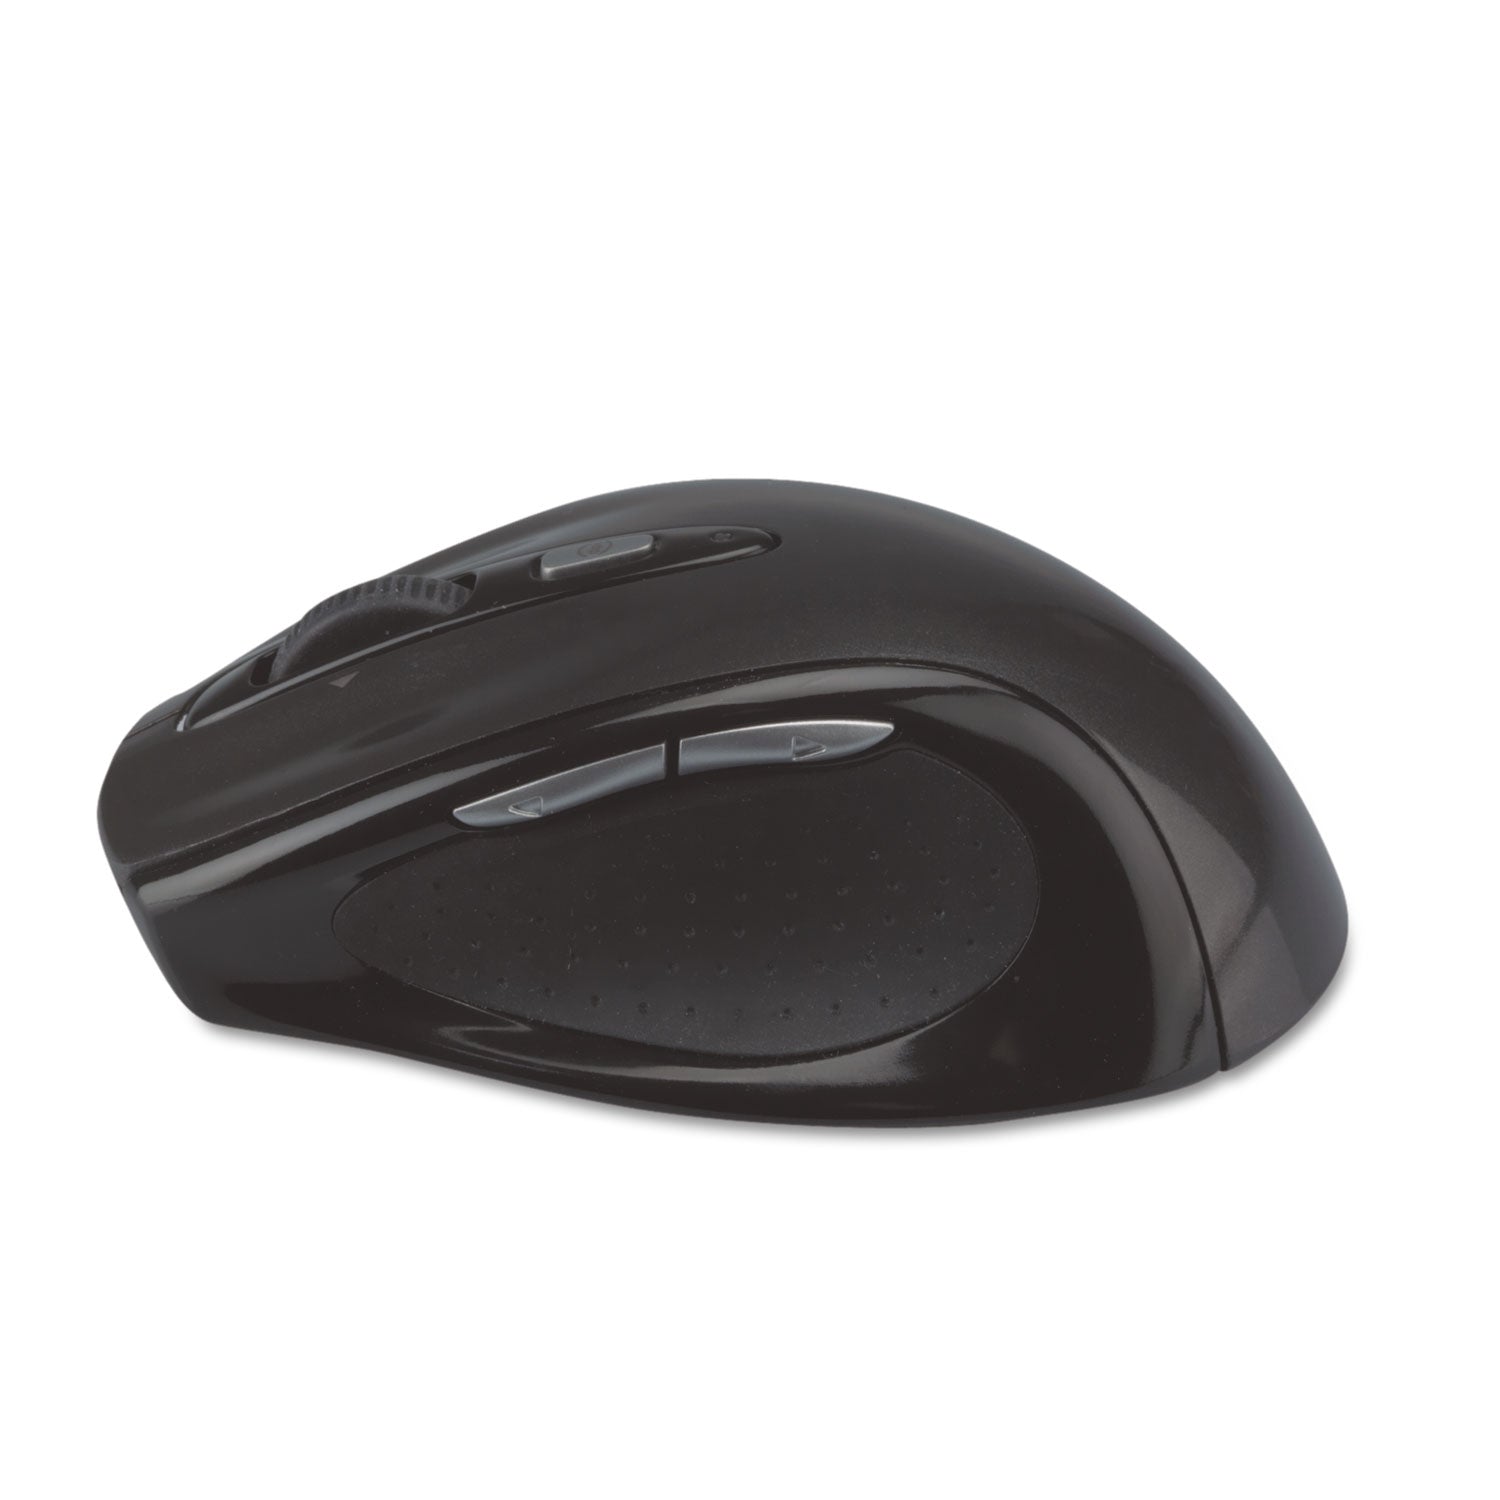 Wireless Optical Mouse with USB-A, 2.4 GHz Frequency/32 ft Wireless Range, Left/Right Hand Use, Gray/Black - 